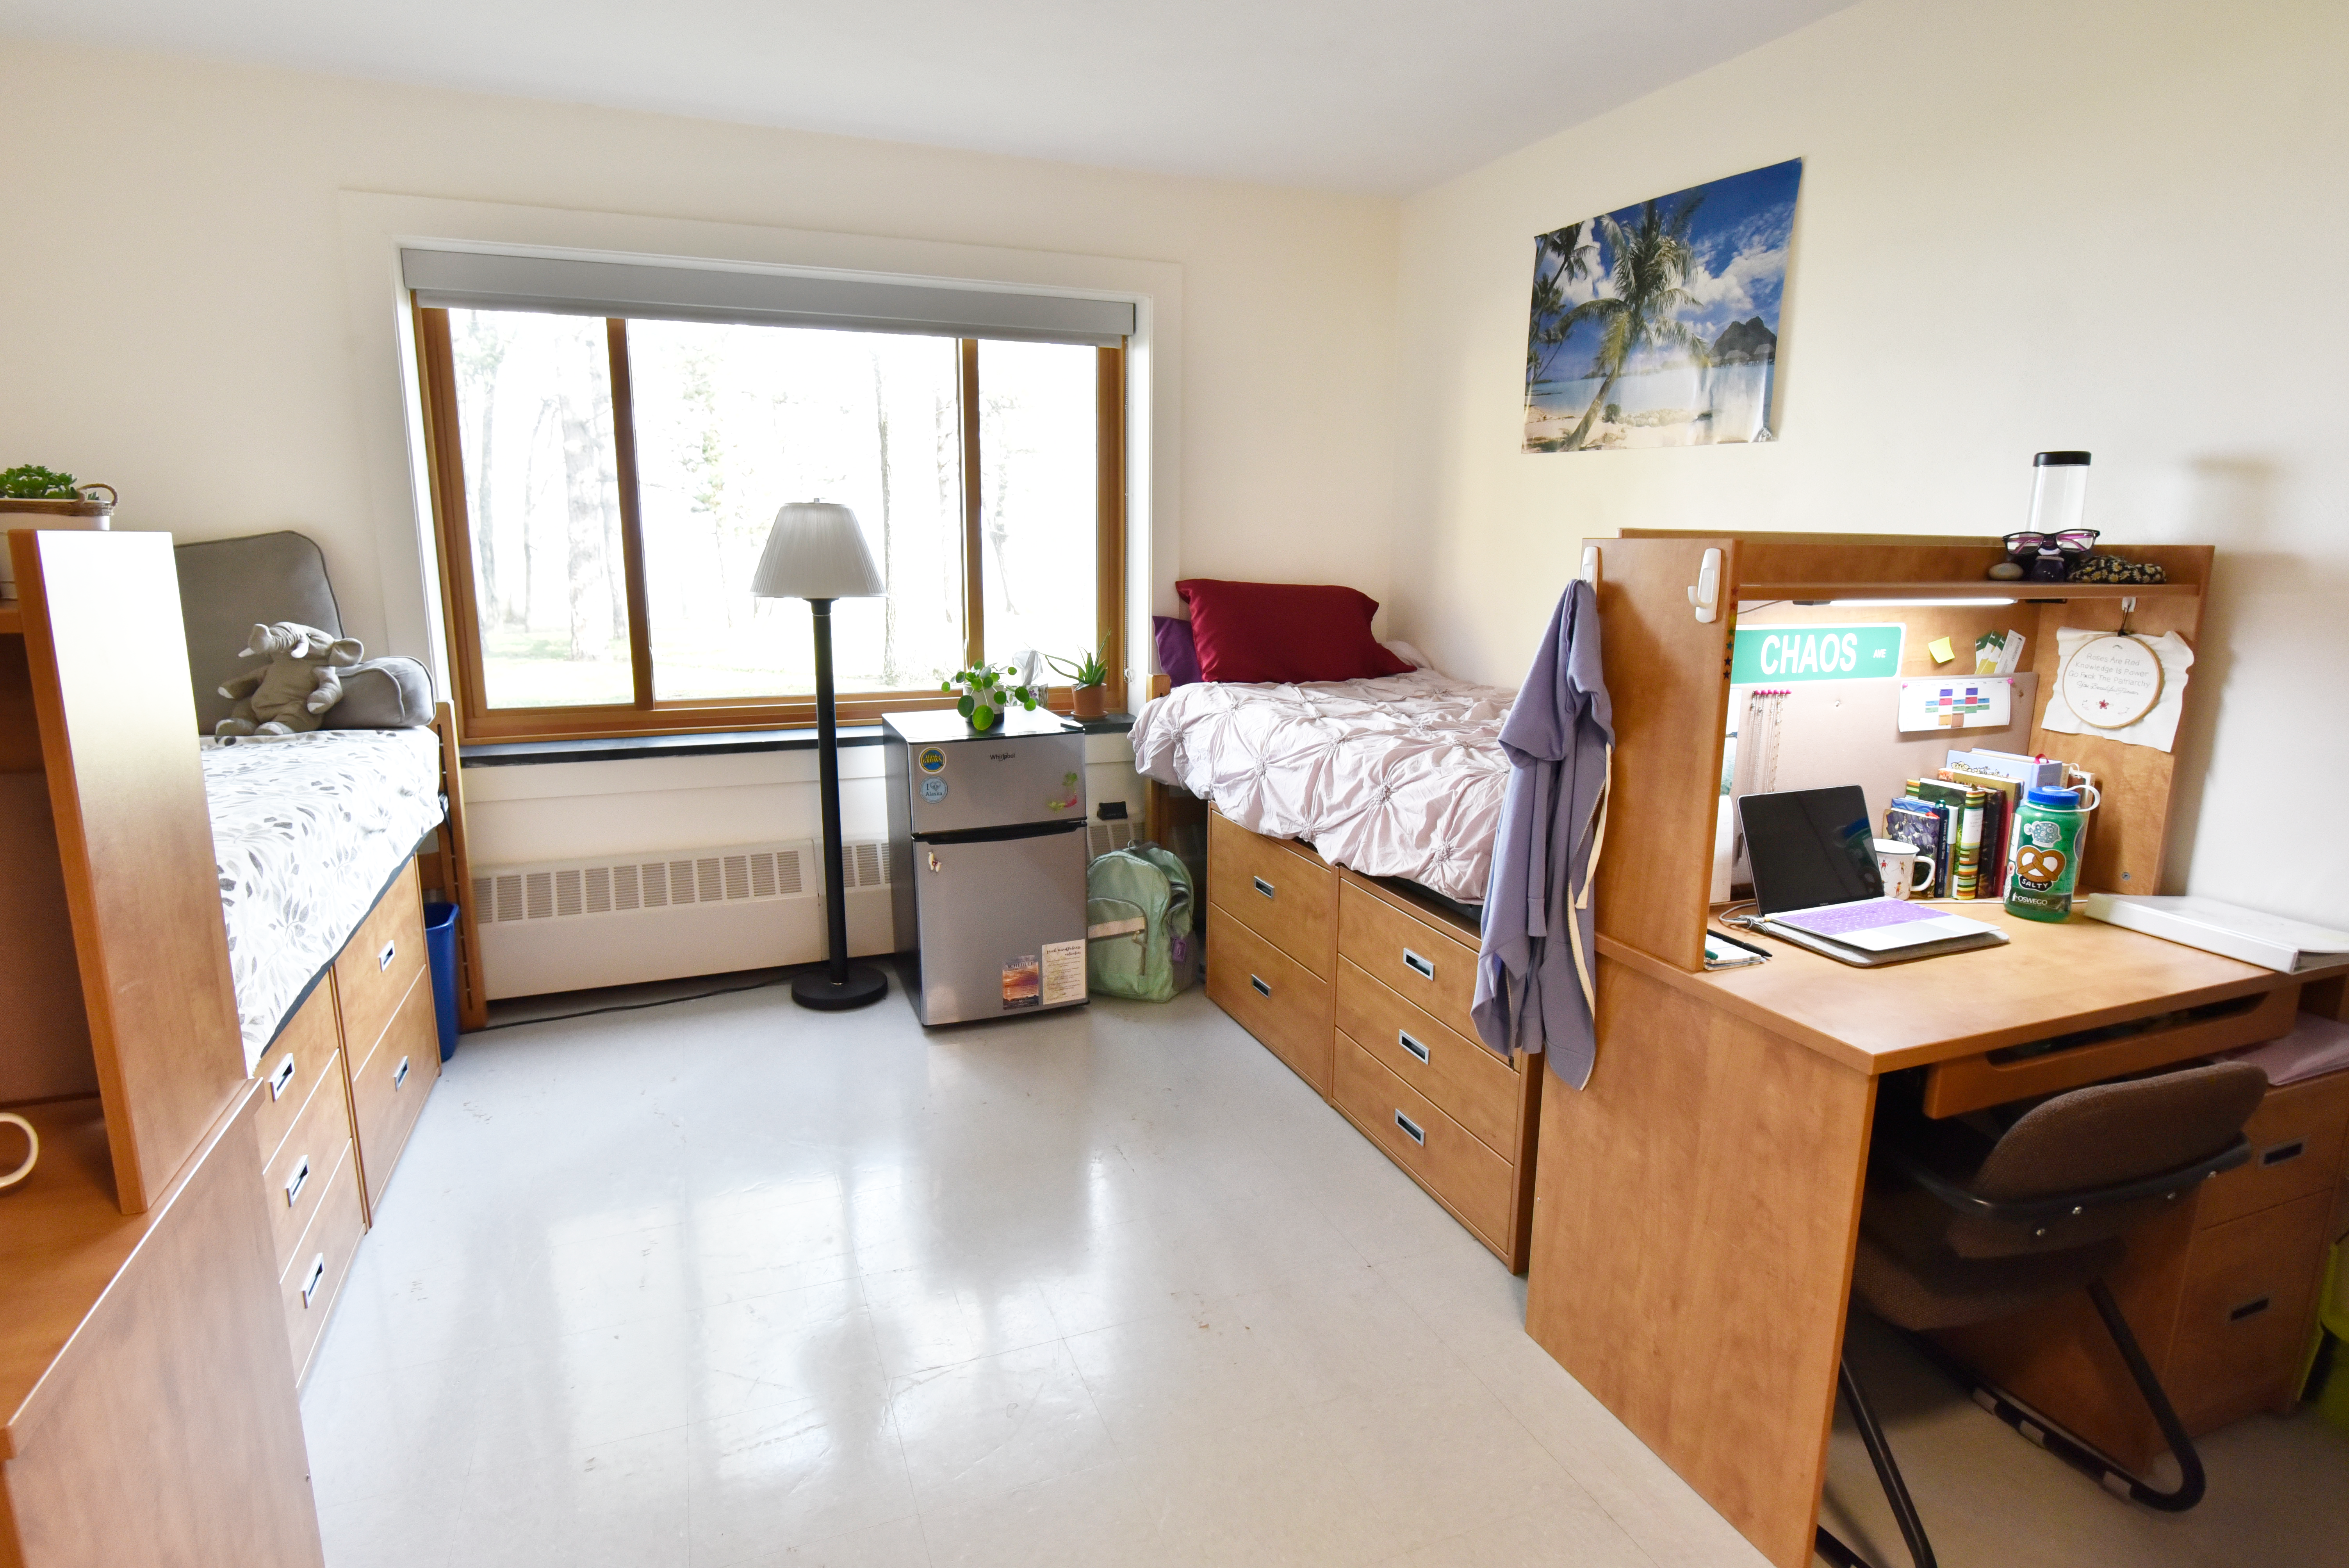 A double standard room in Scales Hall, furnished with two sets of beds, dressers, desks, desk chairs, and closets on each side of the room